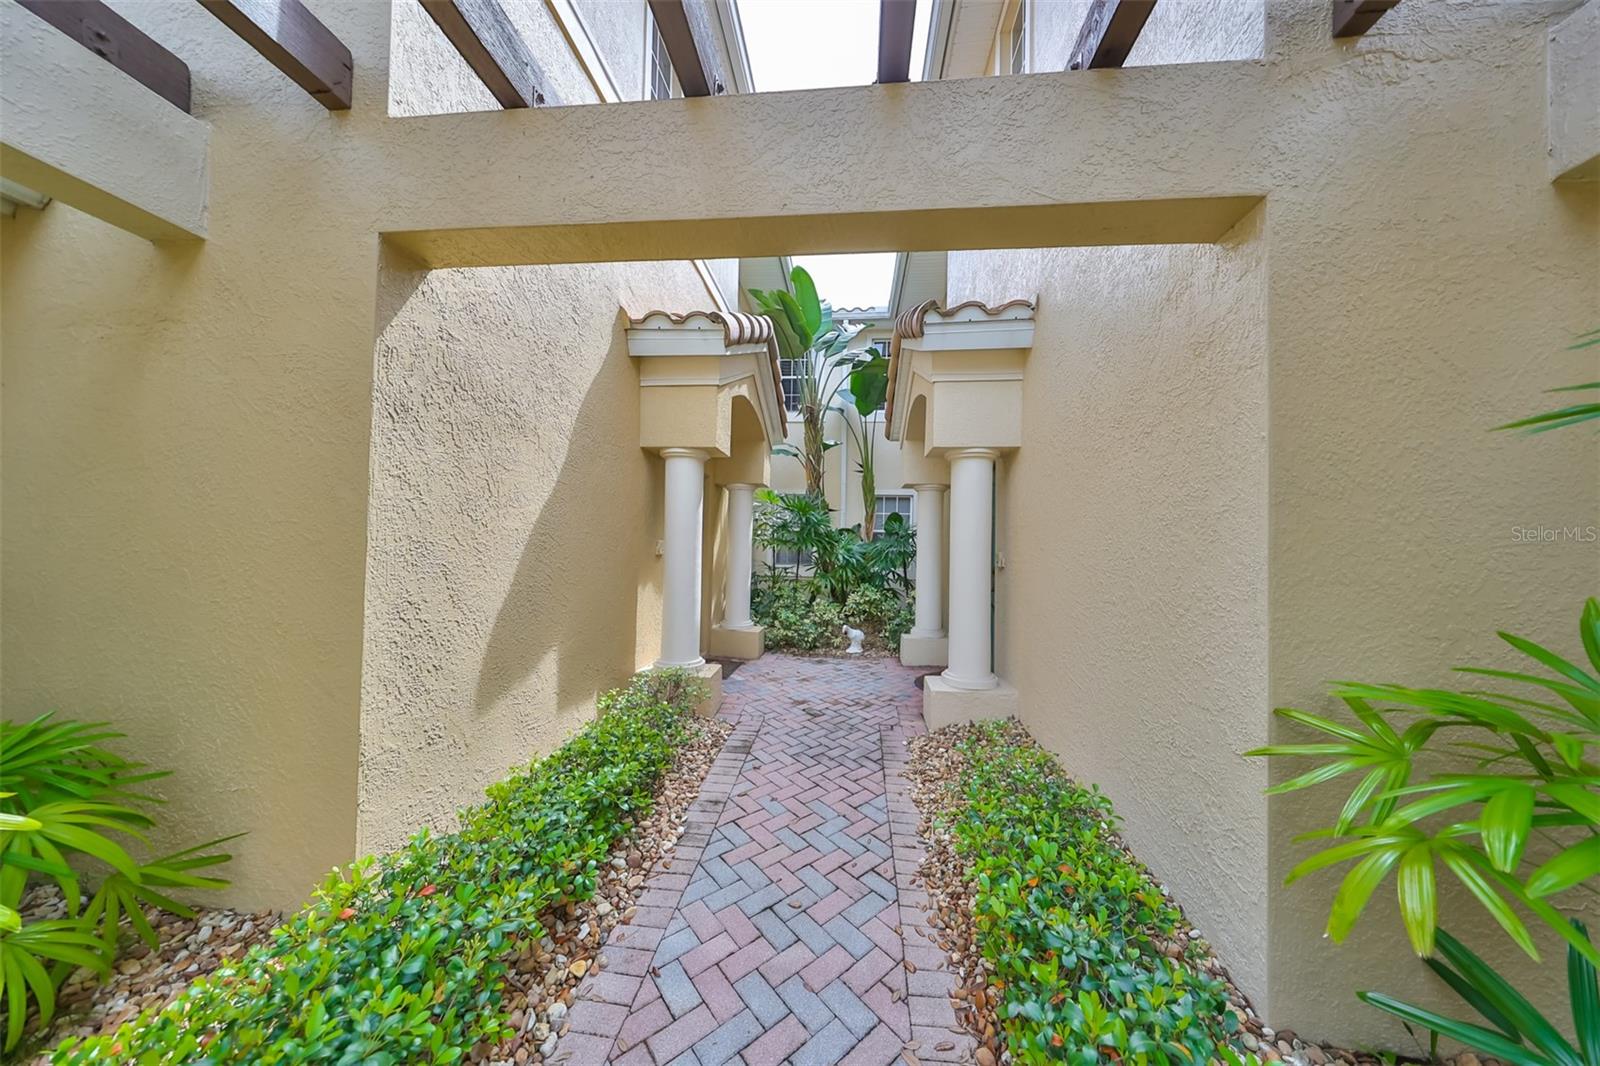 A lovely pergola invites you into the breezeway that leads you to the front door of this upstairs unit.